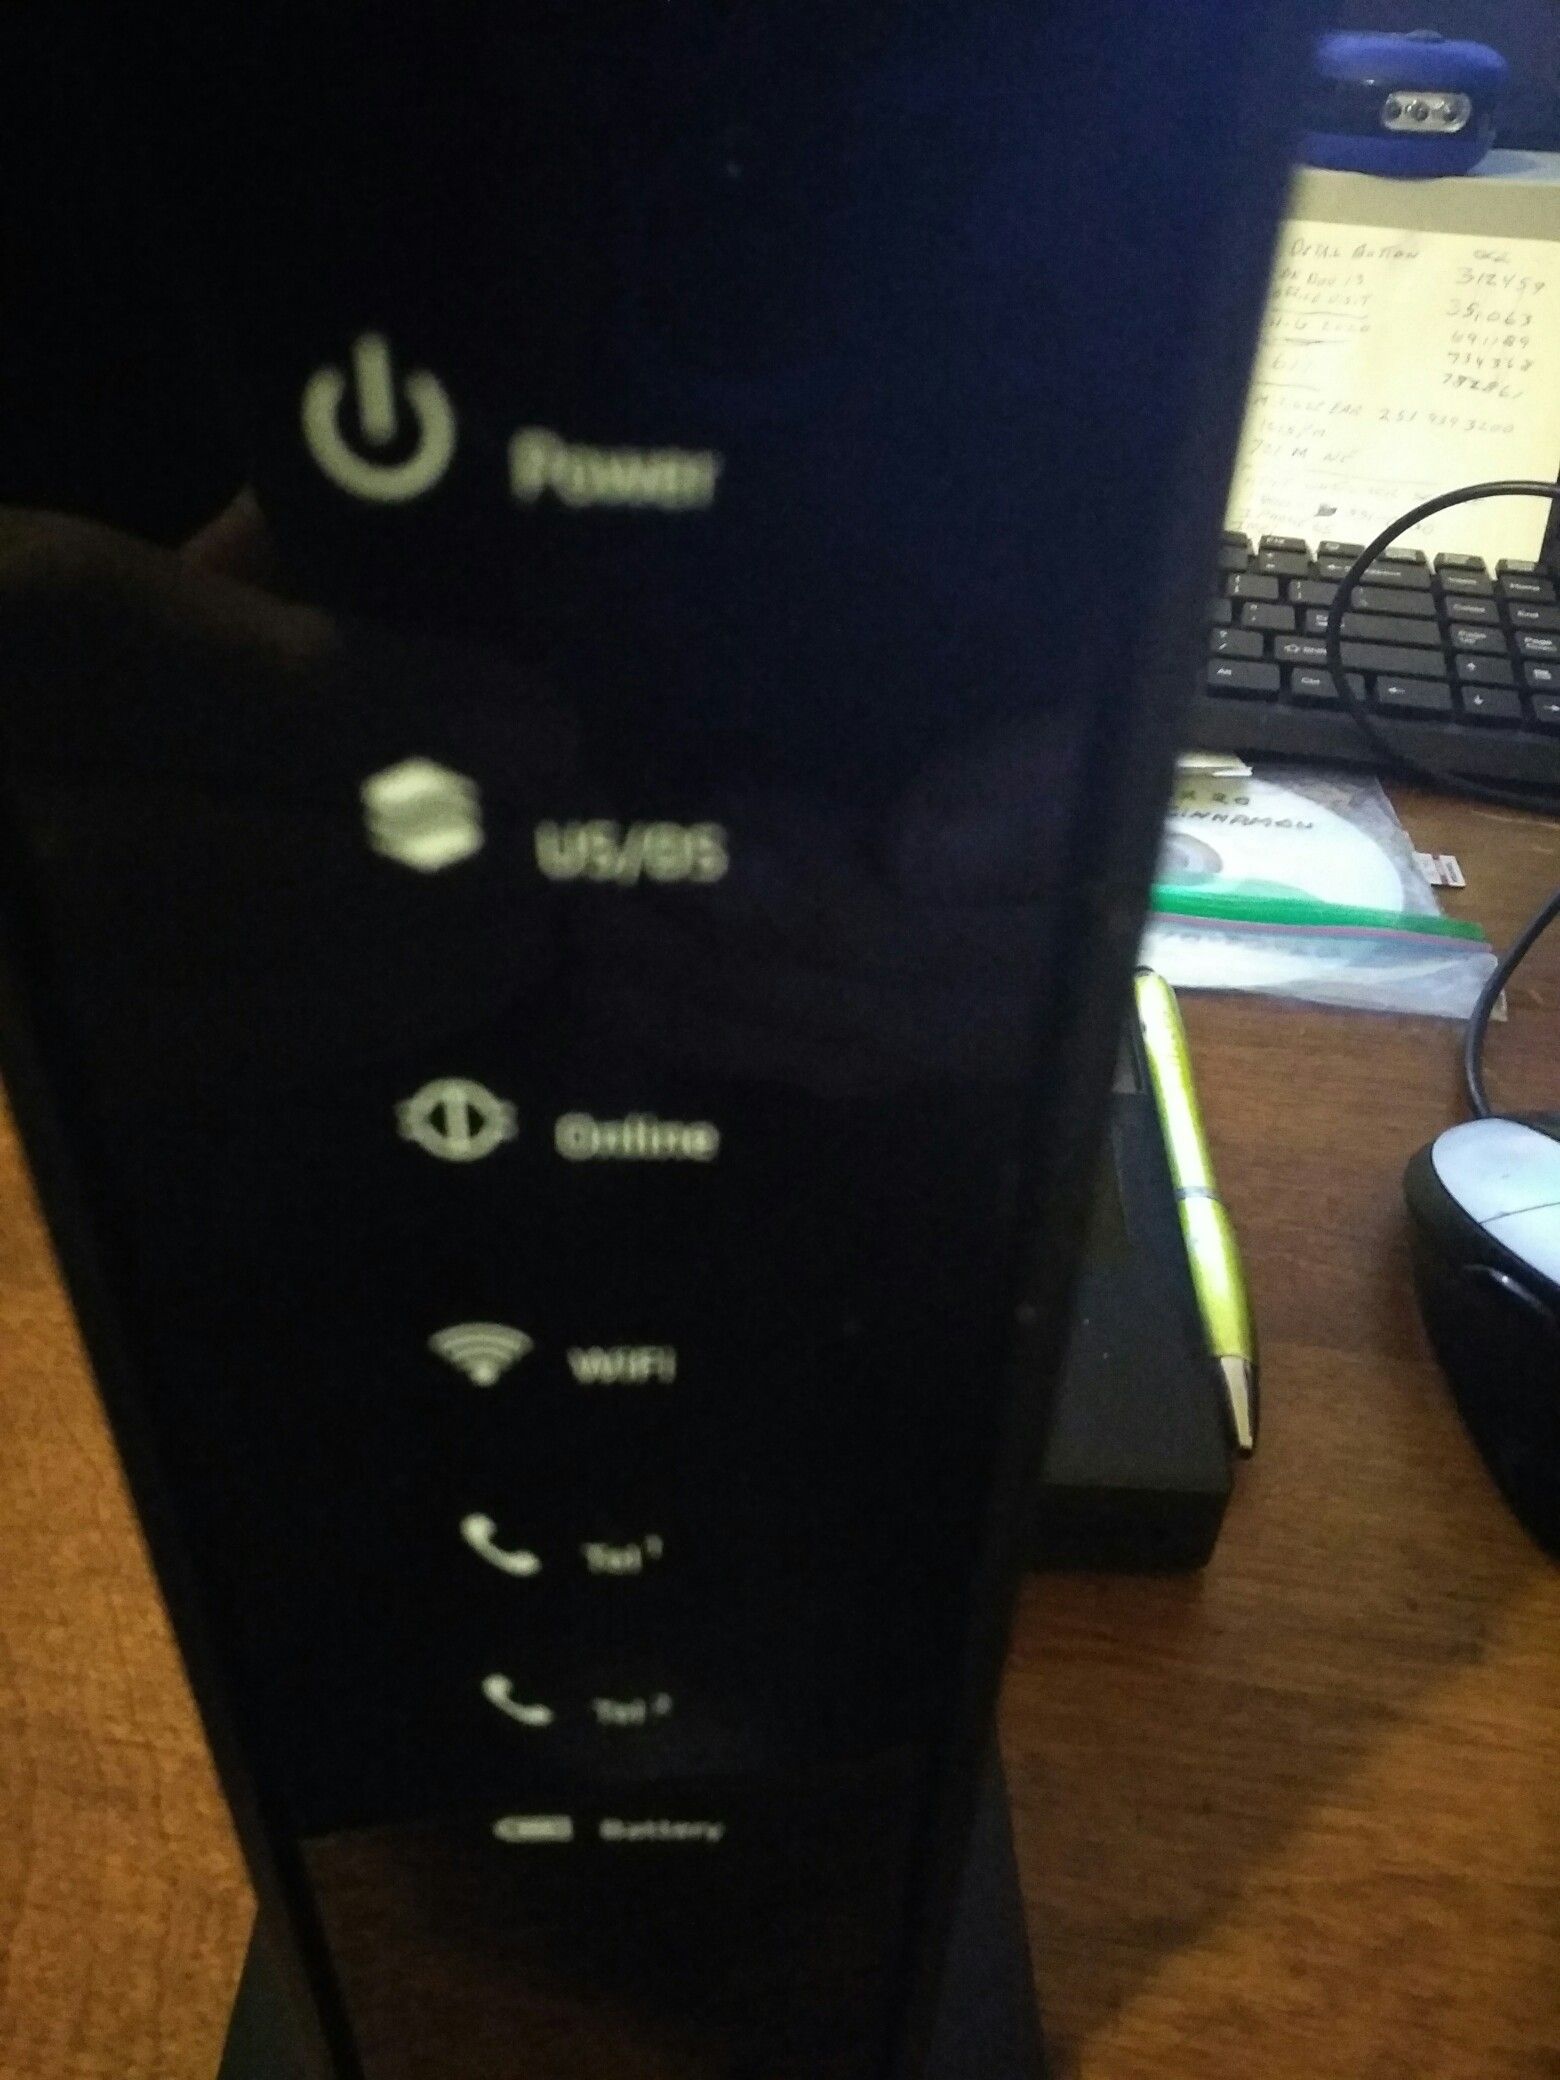 Xfinity modem with two ports for phone and four ports for internet